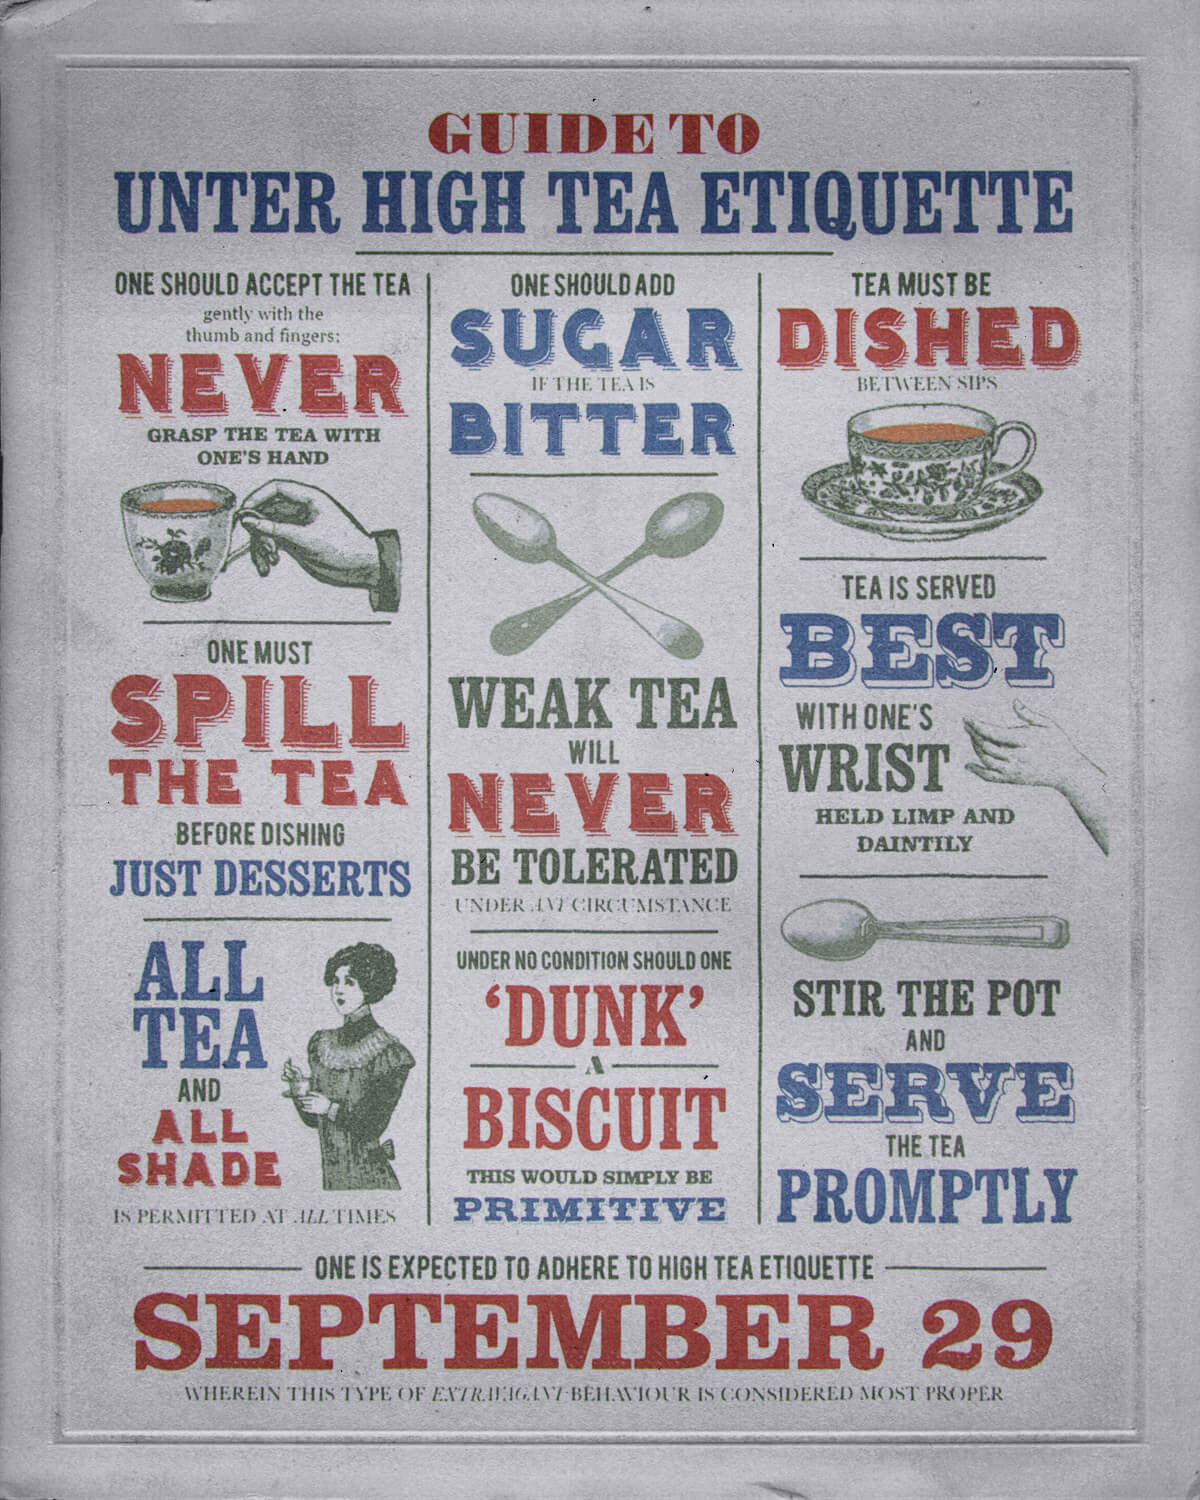 Poster for Unter High Tea